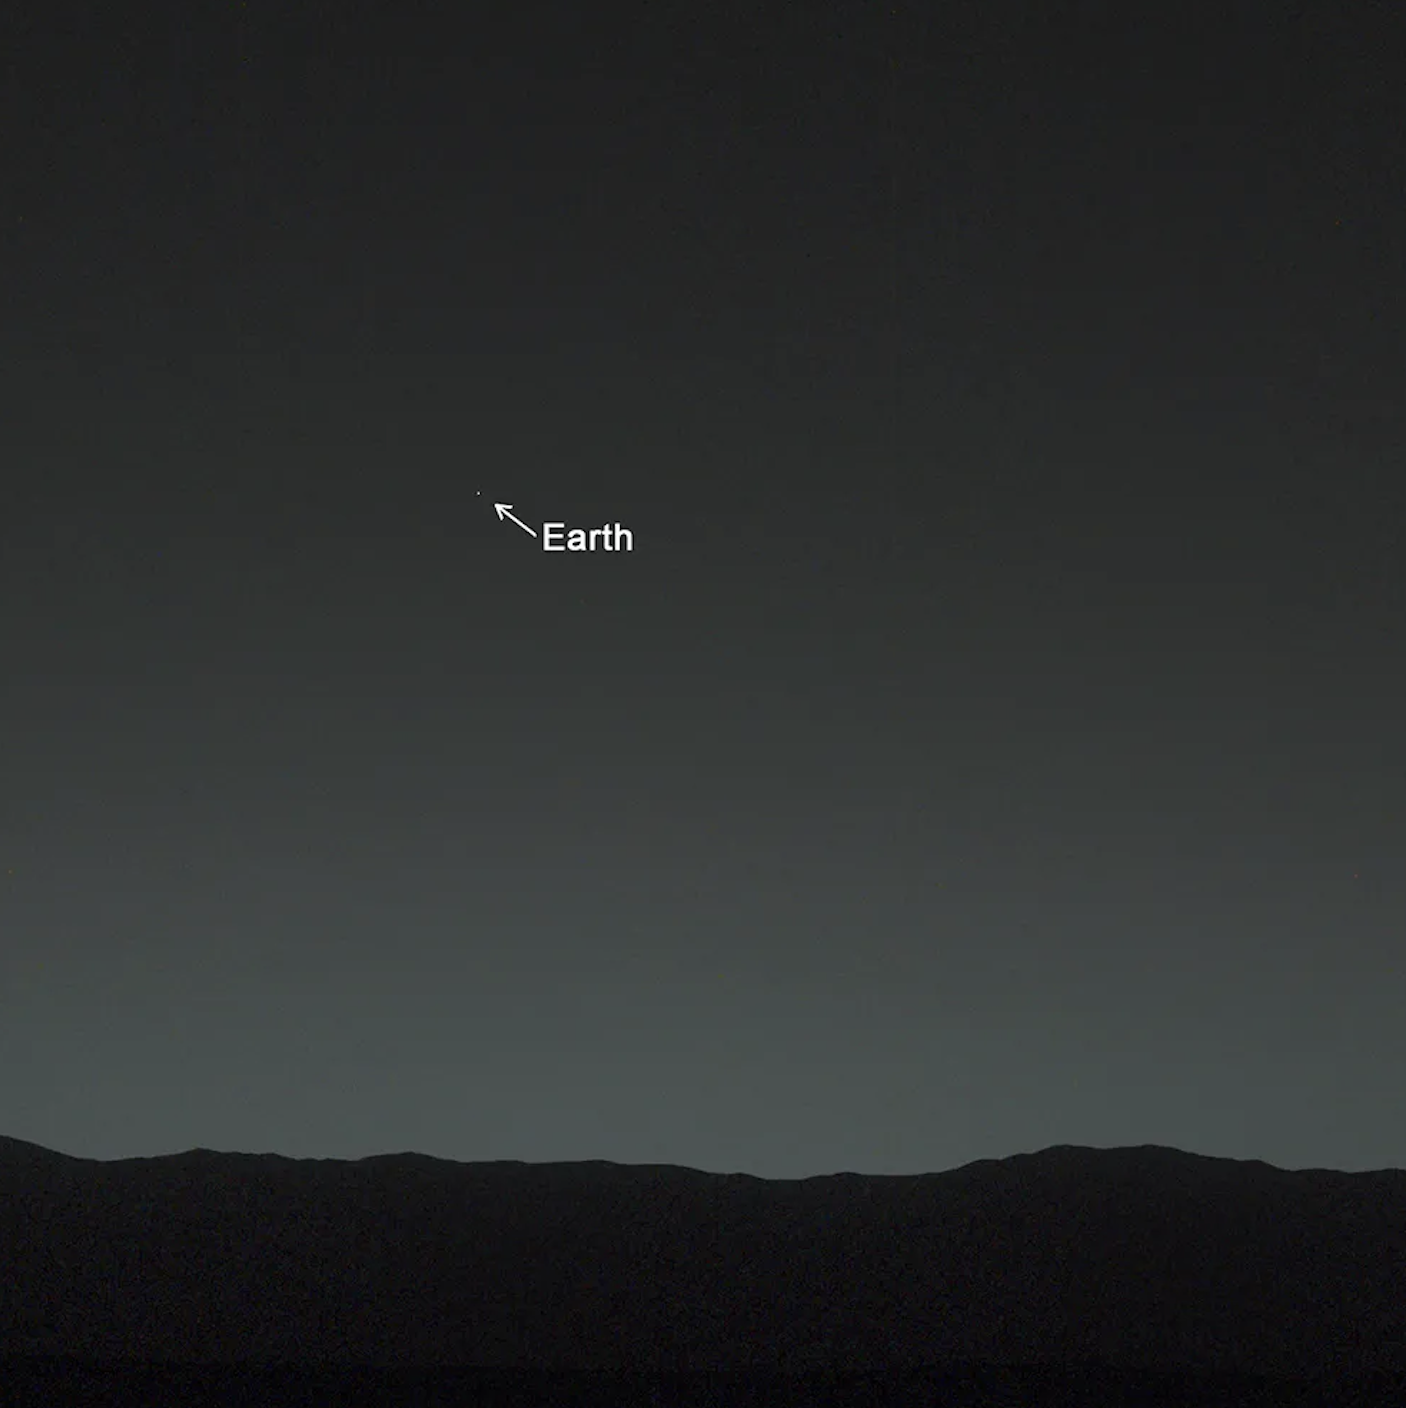 Pale Blue Dot photo of Earth taken from Voyager 1, with Earth as a tiny speck in vast darkness